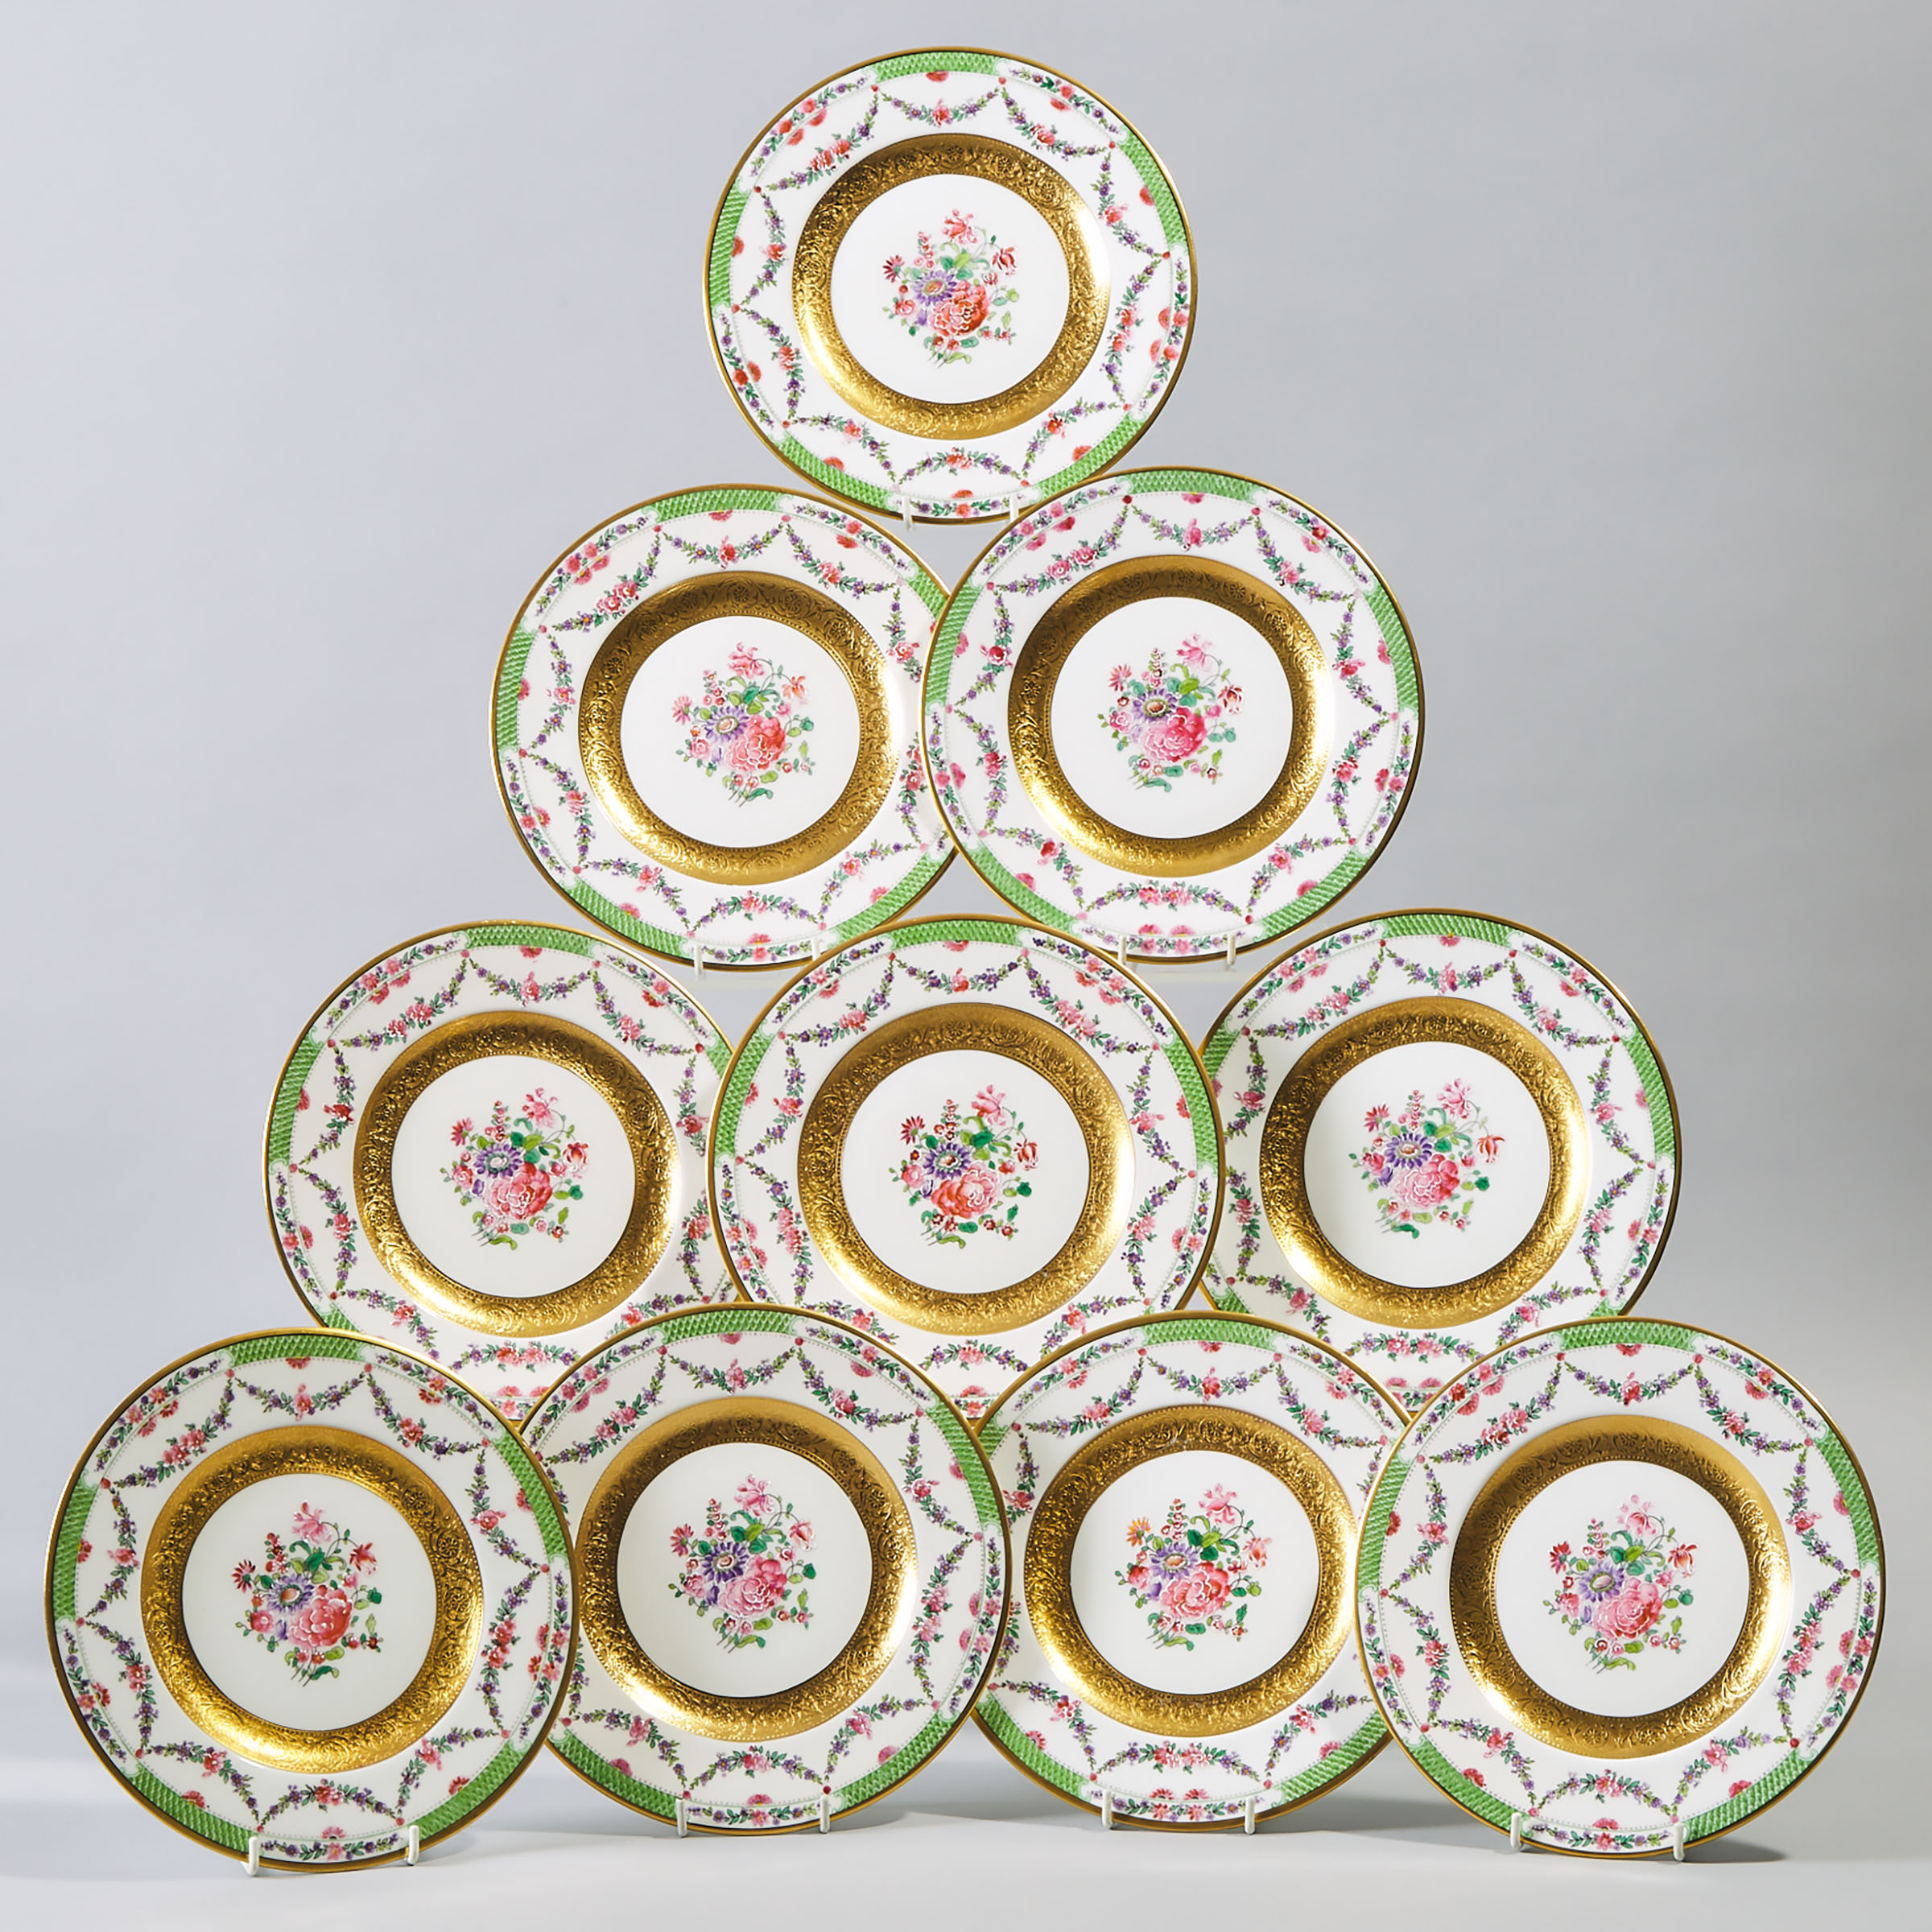 Ten George Jones Floral Decorated and Gilt Banded Plates, c.1891-1921